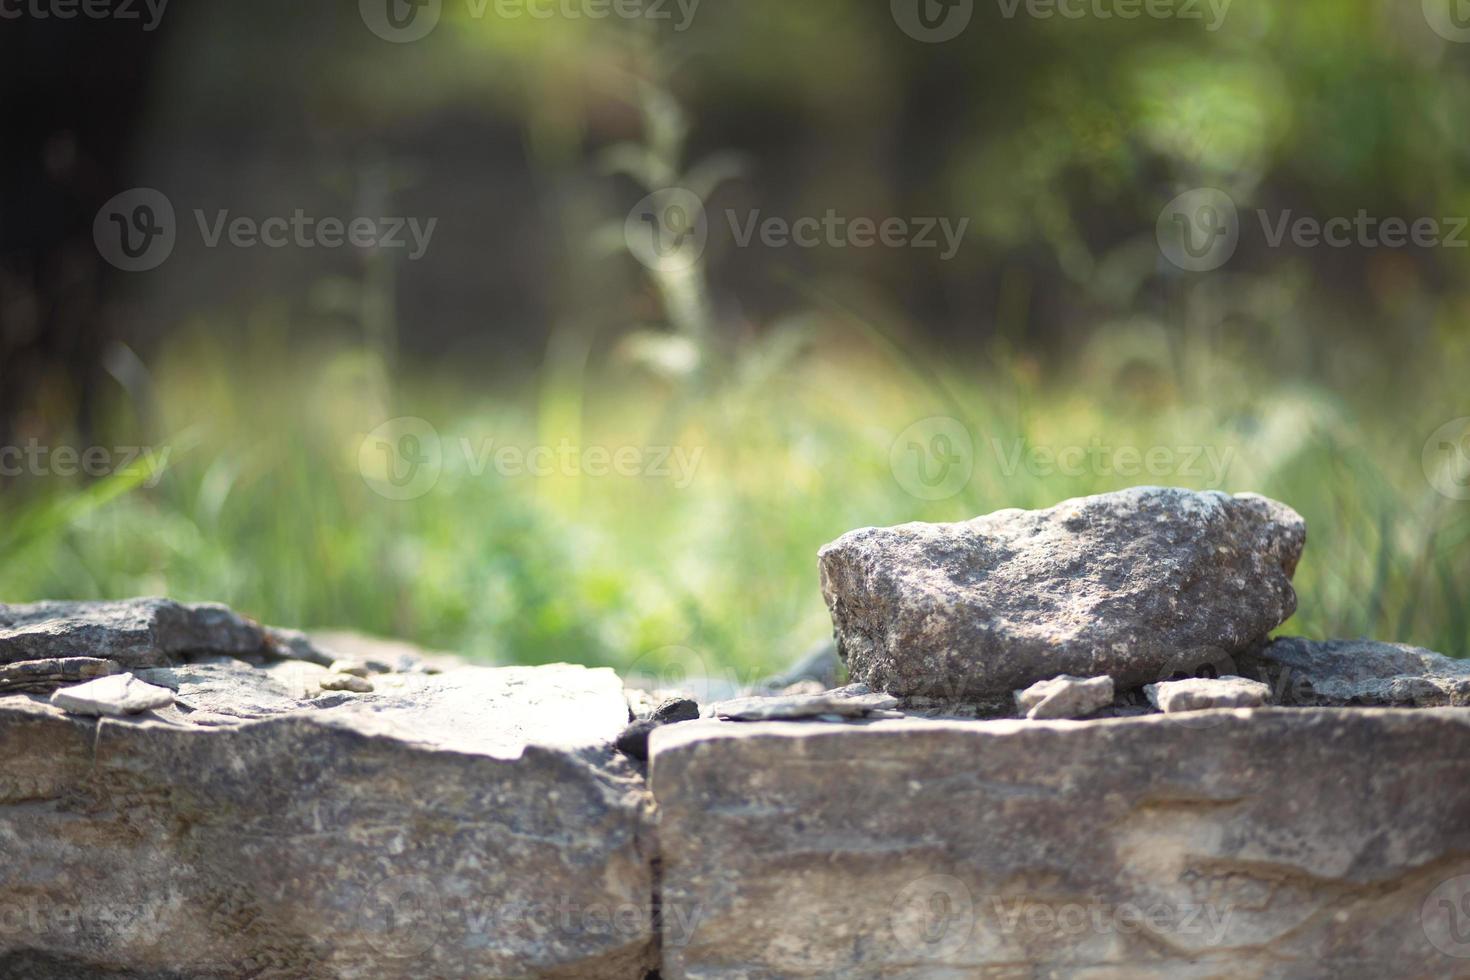 Masonry walls of natural sand color with green natural vegetation in the background in defocus.. Stone texture close-up foreground, ecology, eco-friendly theme photo